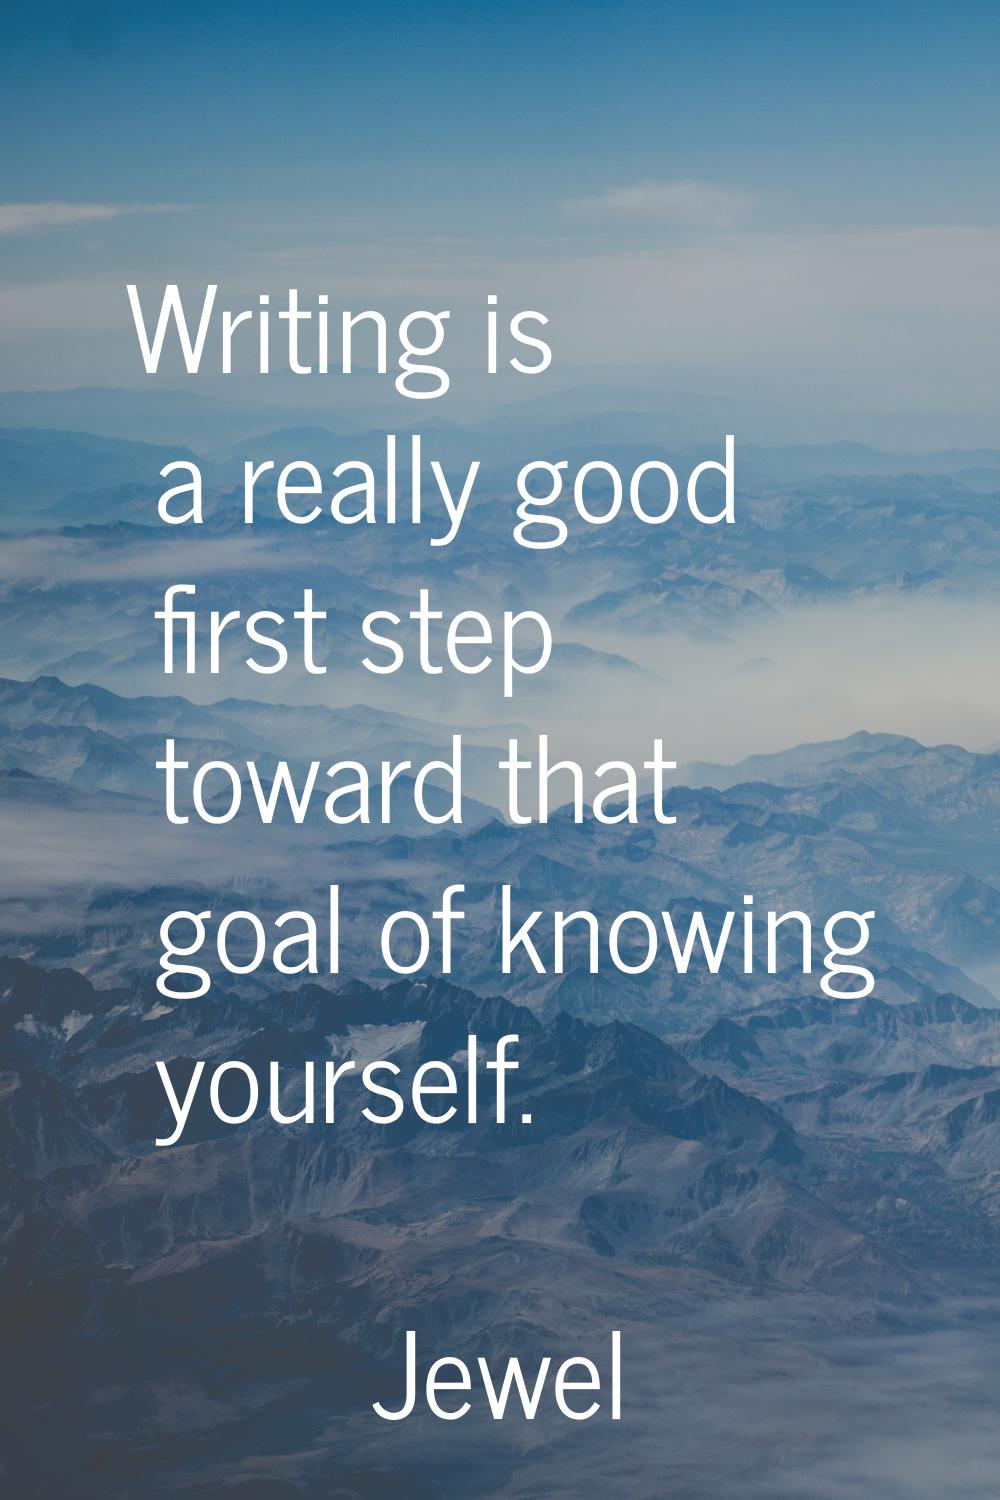 Writing is a really good first step toward that goal of knowing yourself.